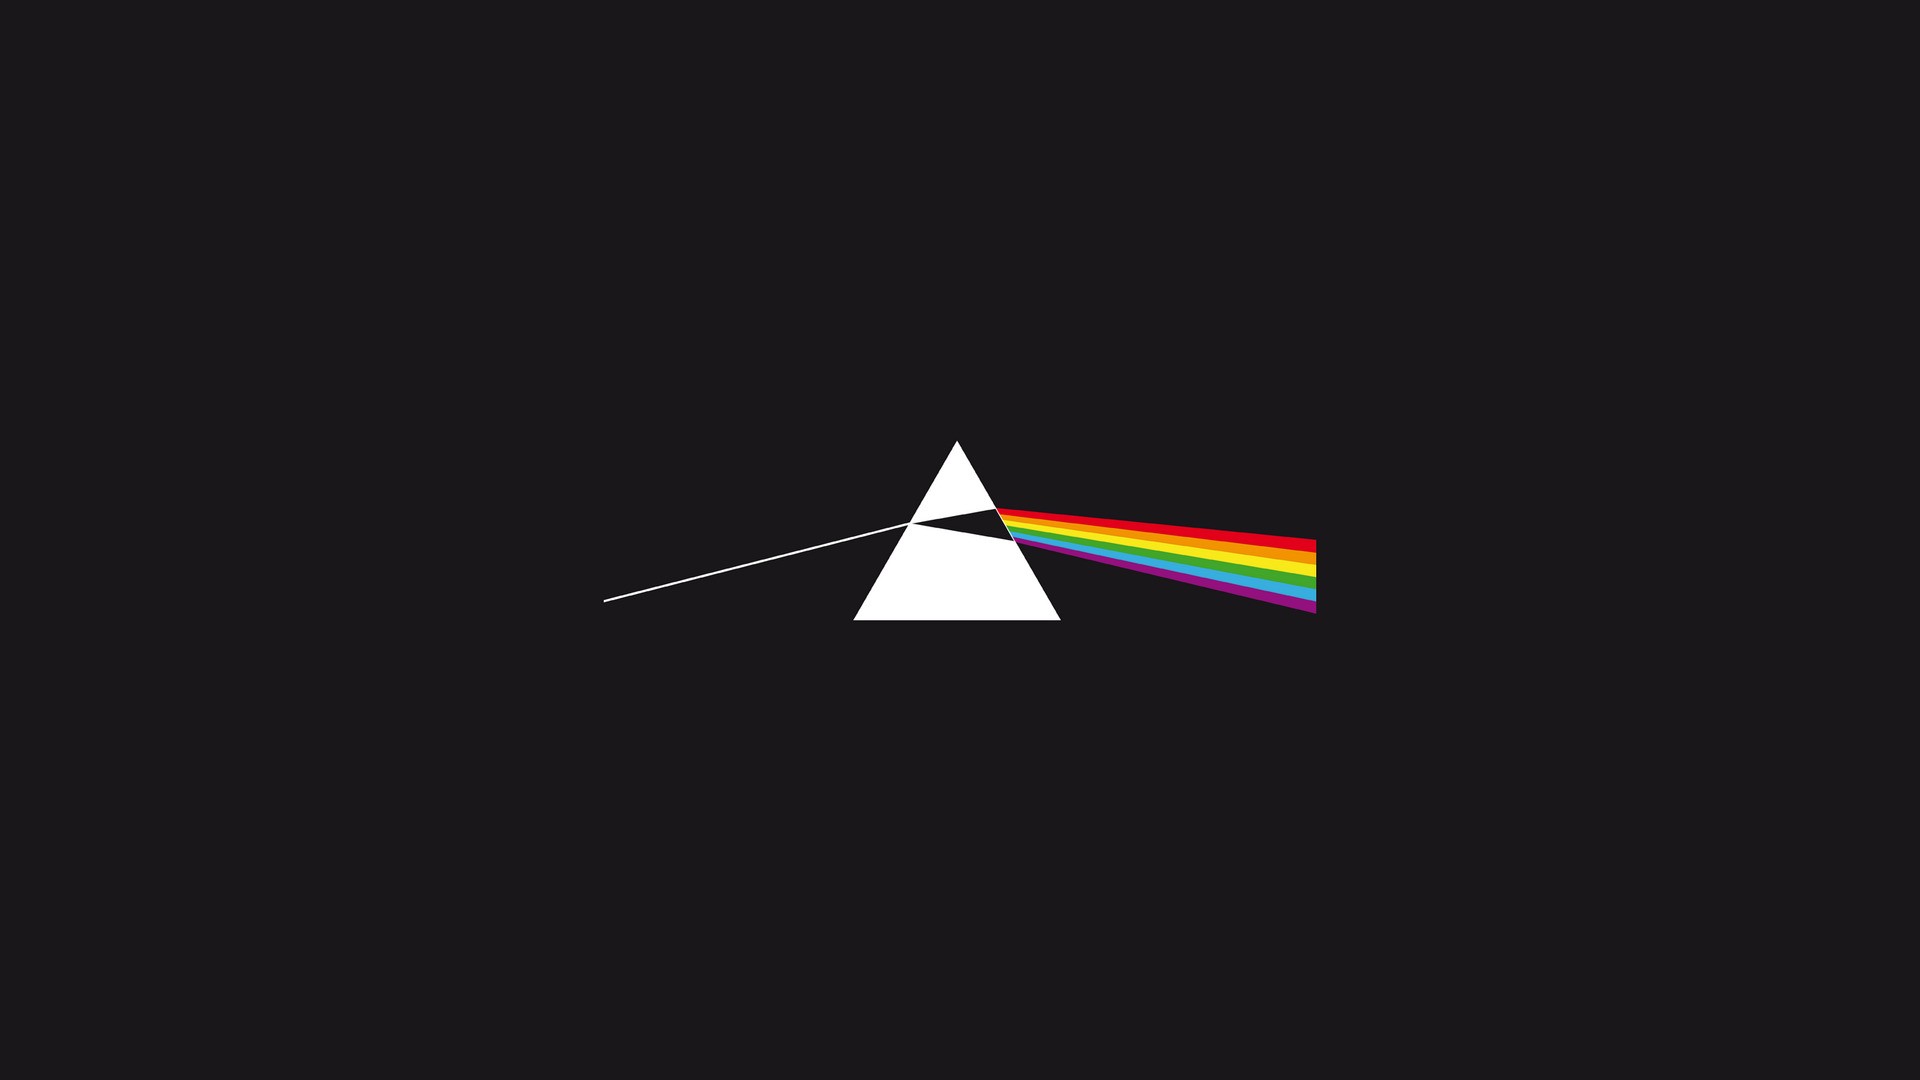 Triangle The Dark Side Of The Moon 1920x1080